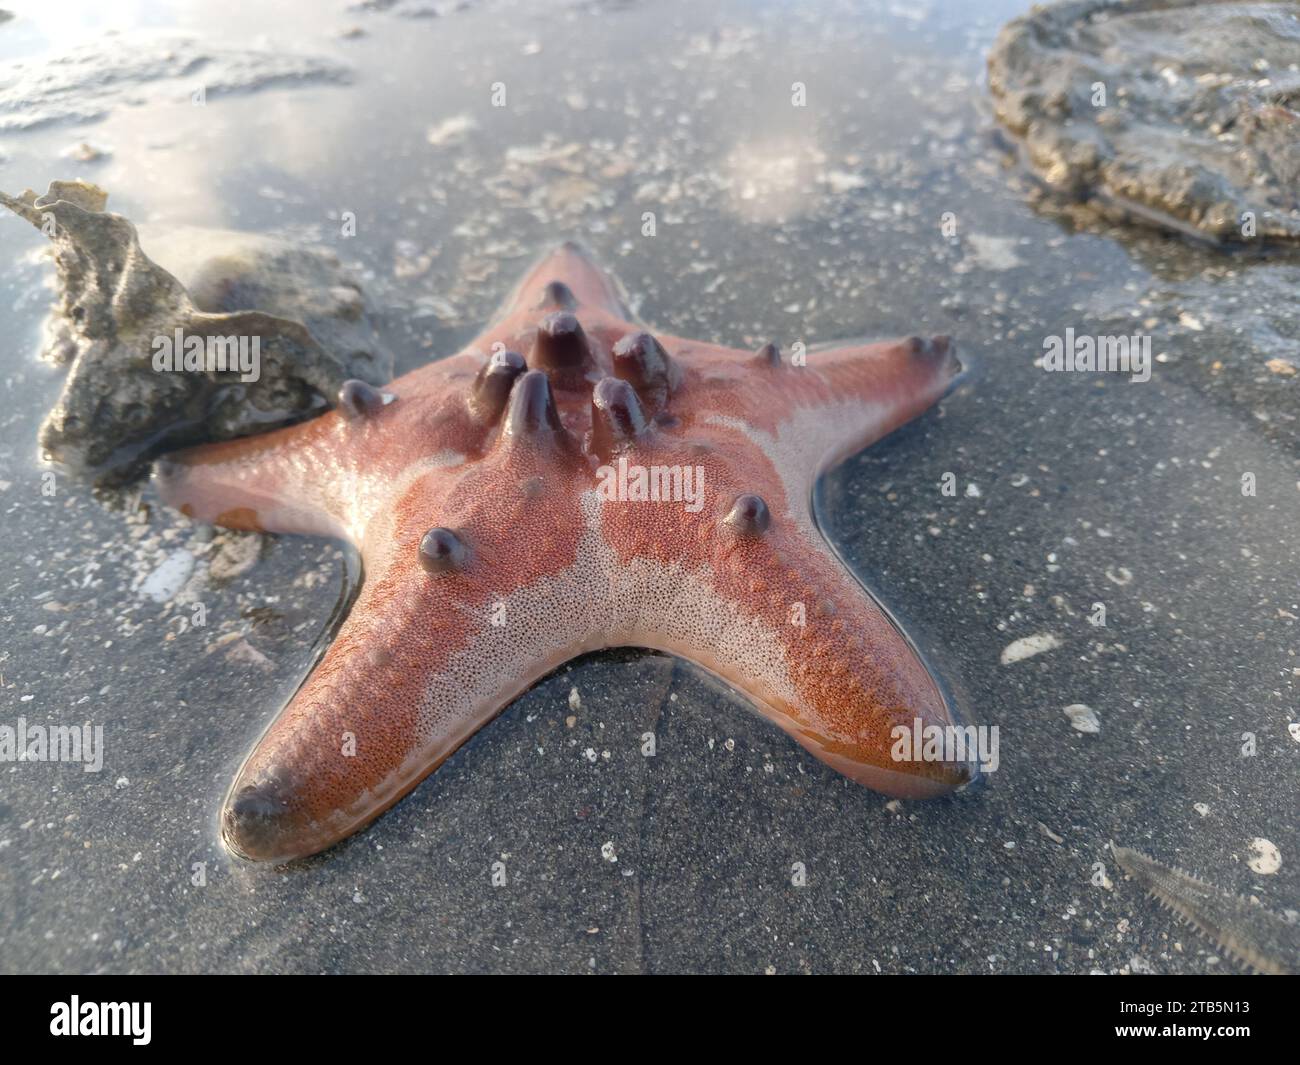 A Chocolate Chip Sea Star or star fist on the beach during low tide in the morning Stock Photo